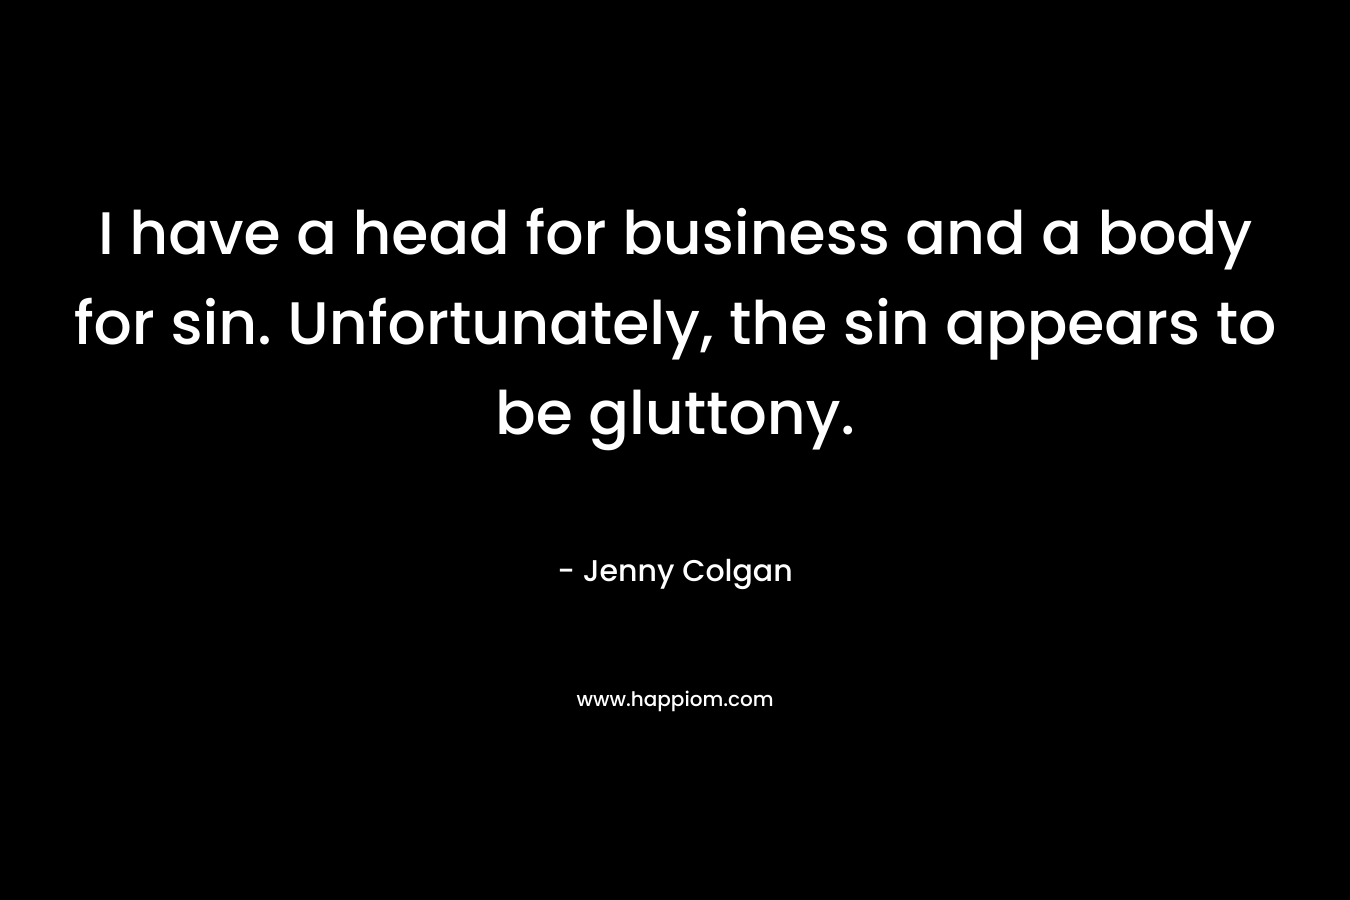 I have a head for business and a body for sin. Unfortunately, the sin appears to be gluttony. – Jenny Colgan